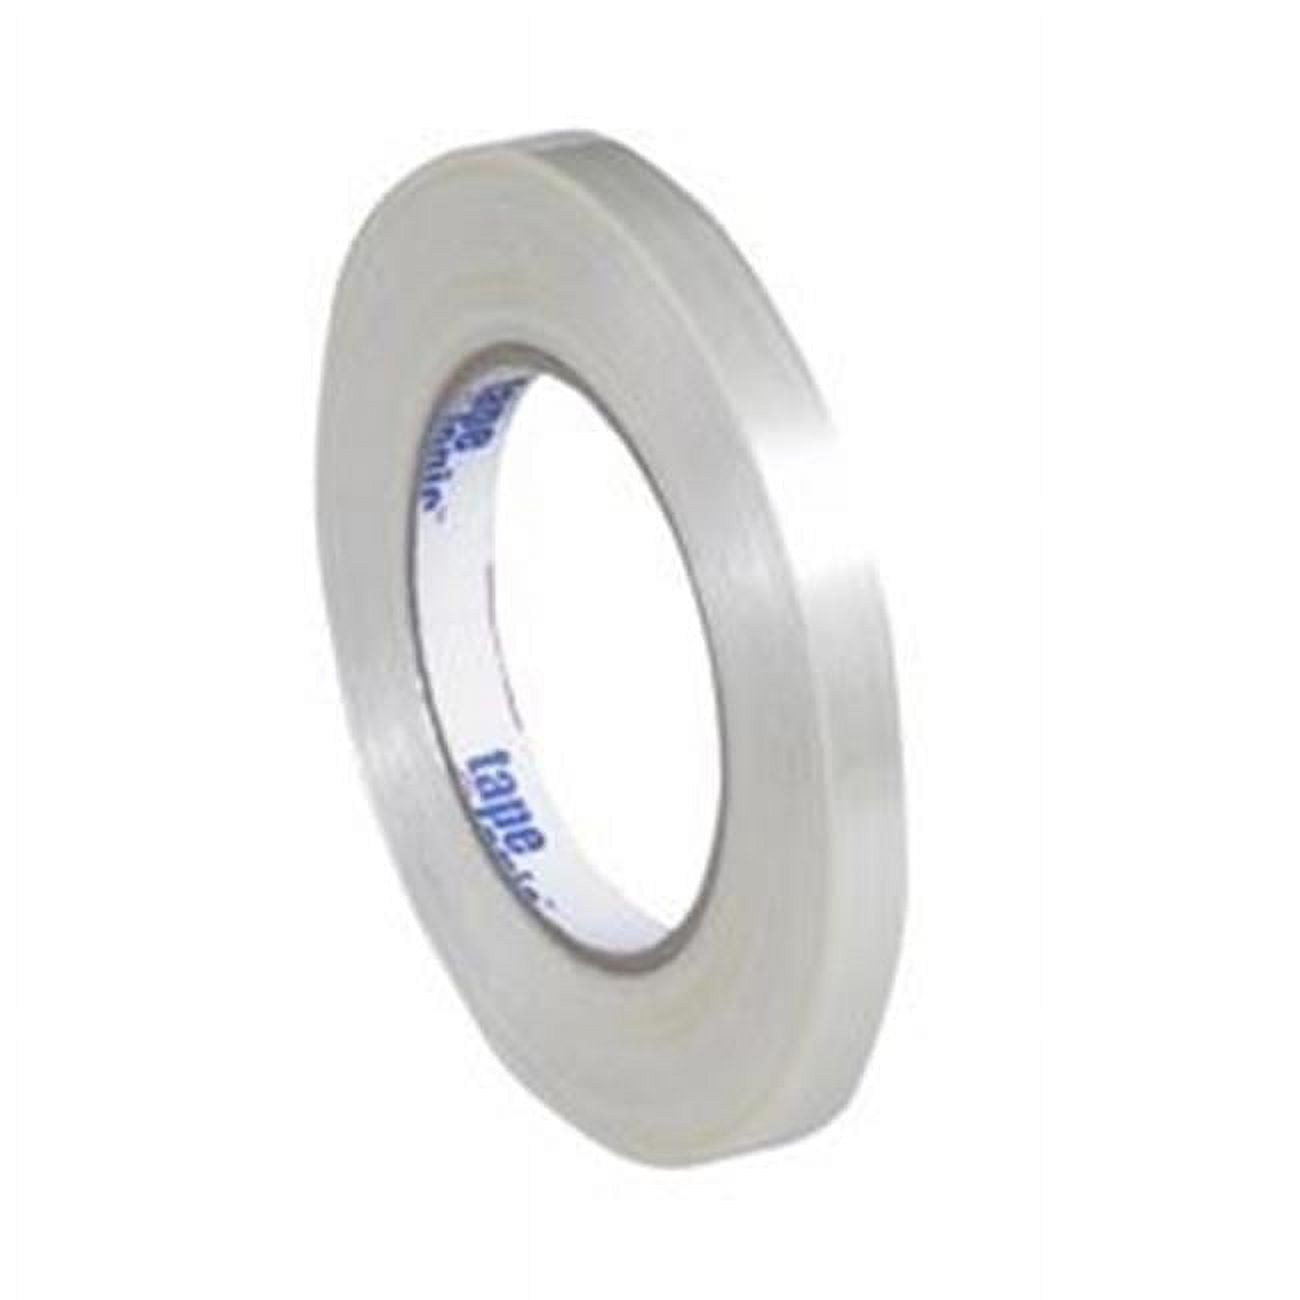 Tape Logic T9131550 0.50 In. X 60 Yards 1550 Strapping Tape, Clear - Case Of 72